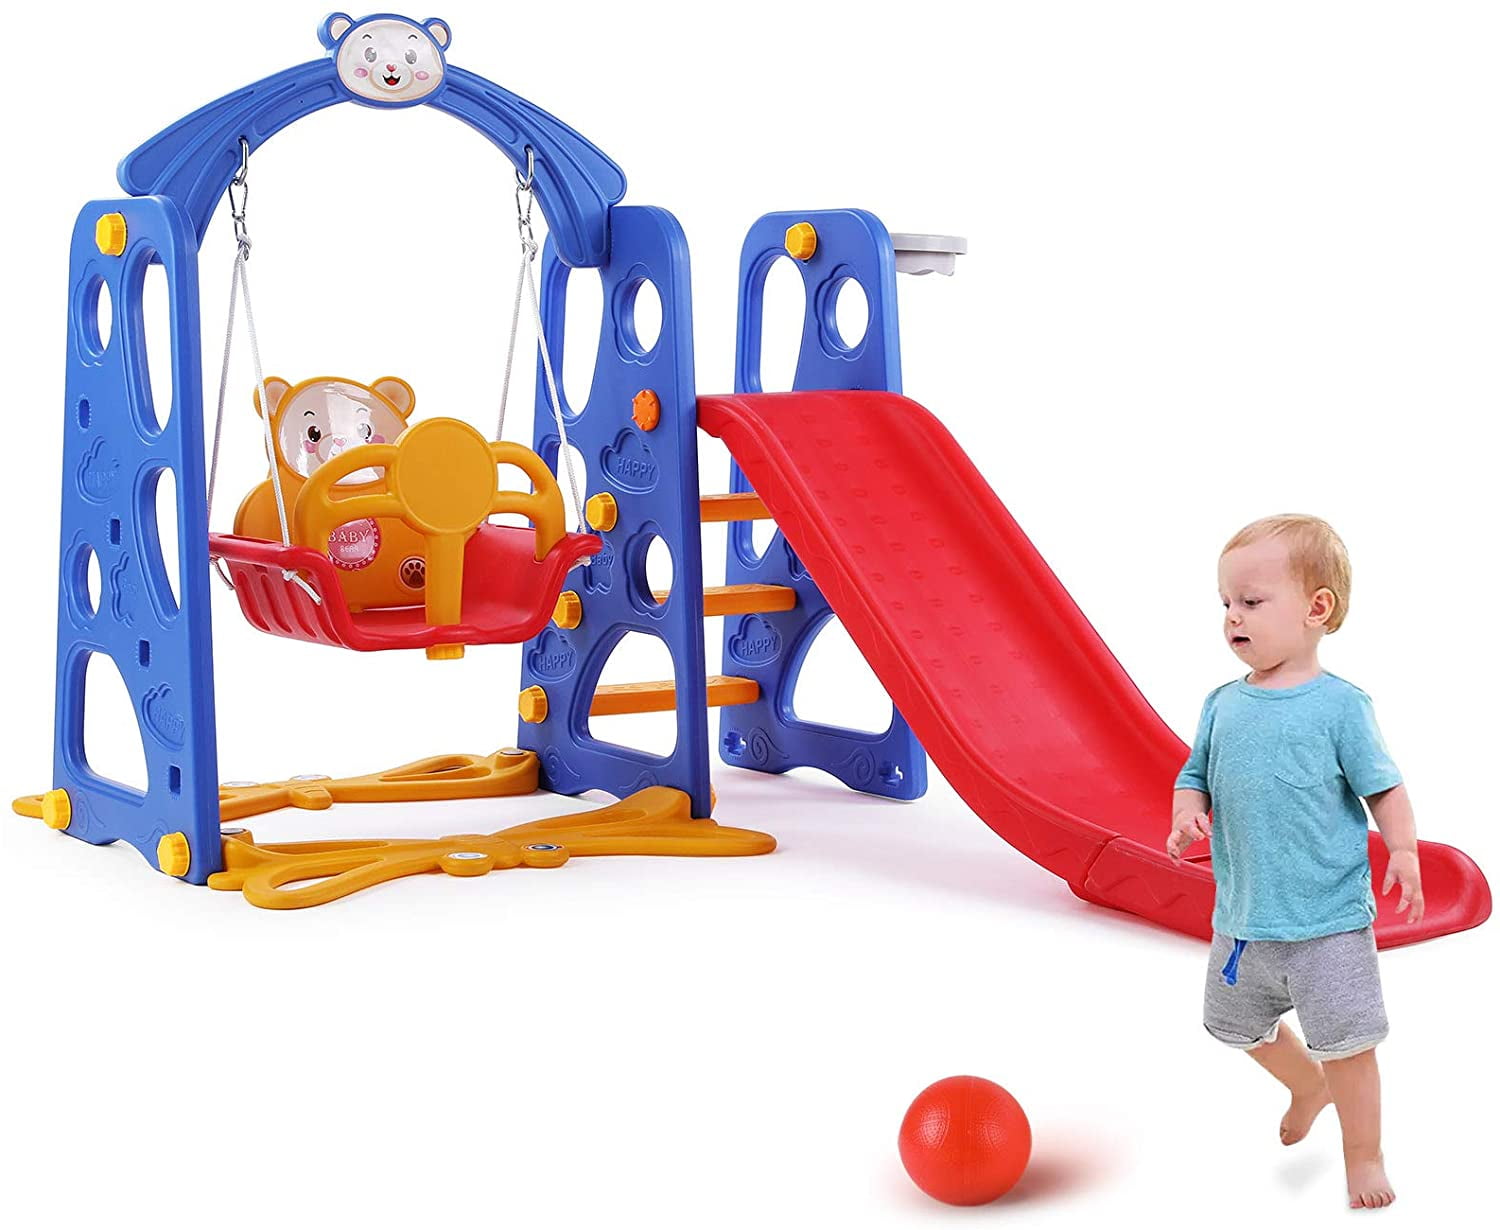 Toddler Climber Slide Play Swing Set Kids Indoor Outdoor Playground Play Set Toy 